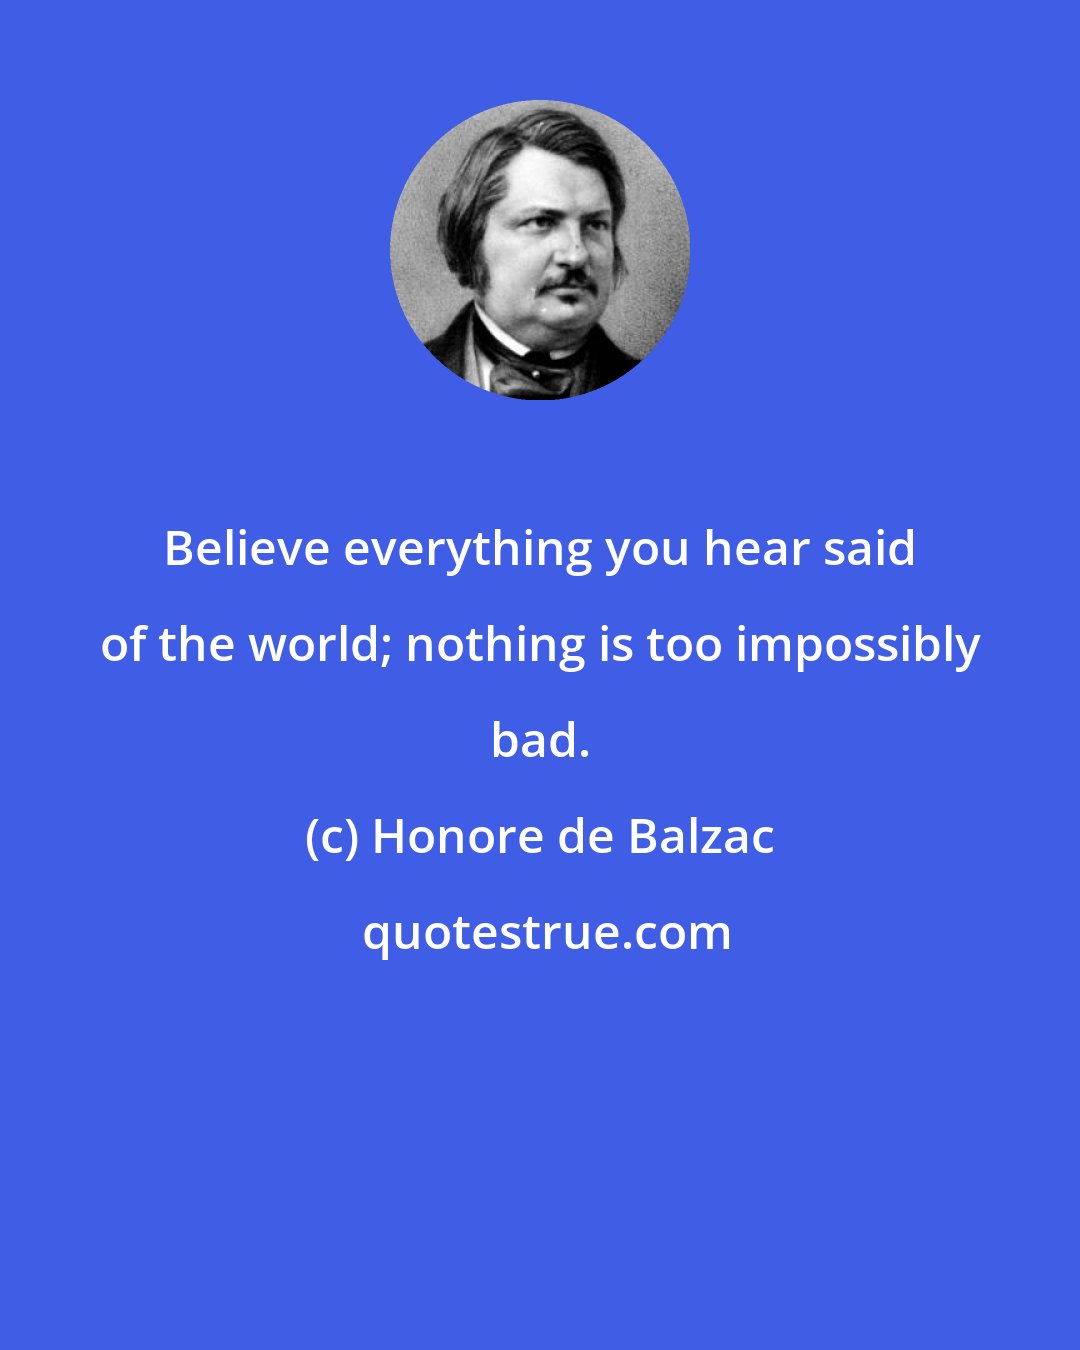 Honore de Balzac: Believe everything you hear said of the world; nothing is too impossibly bad.